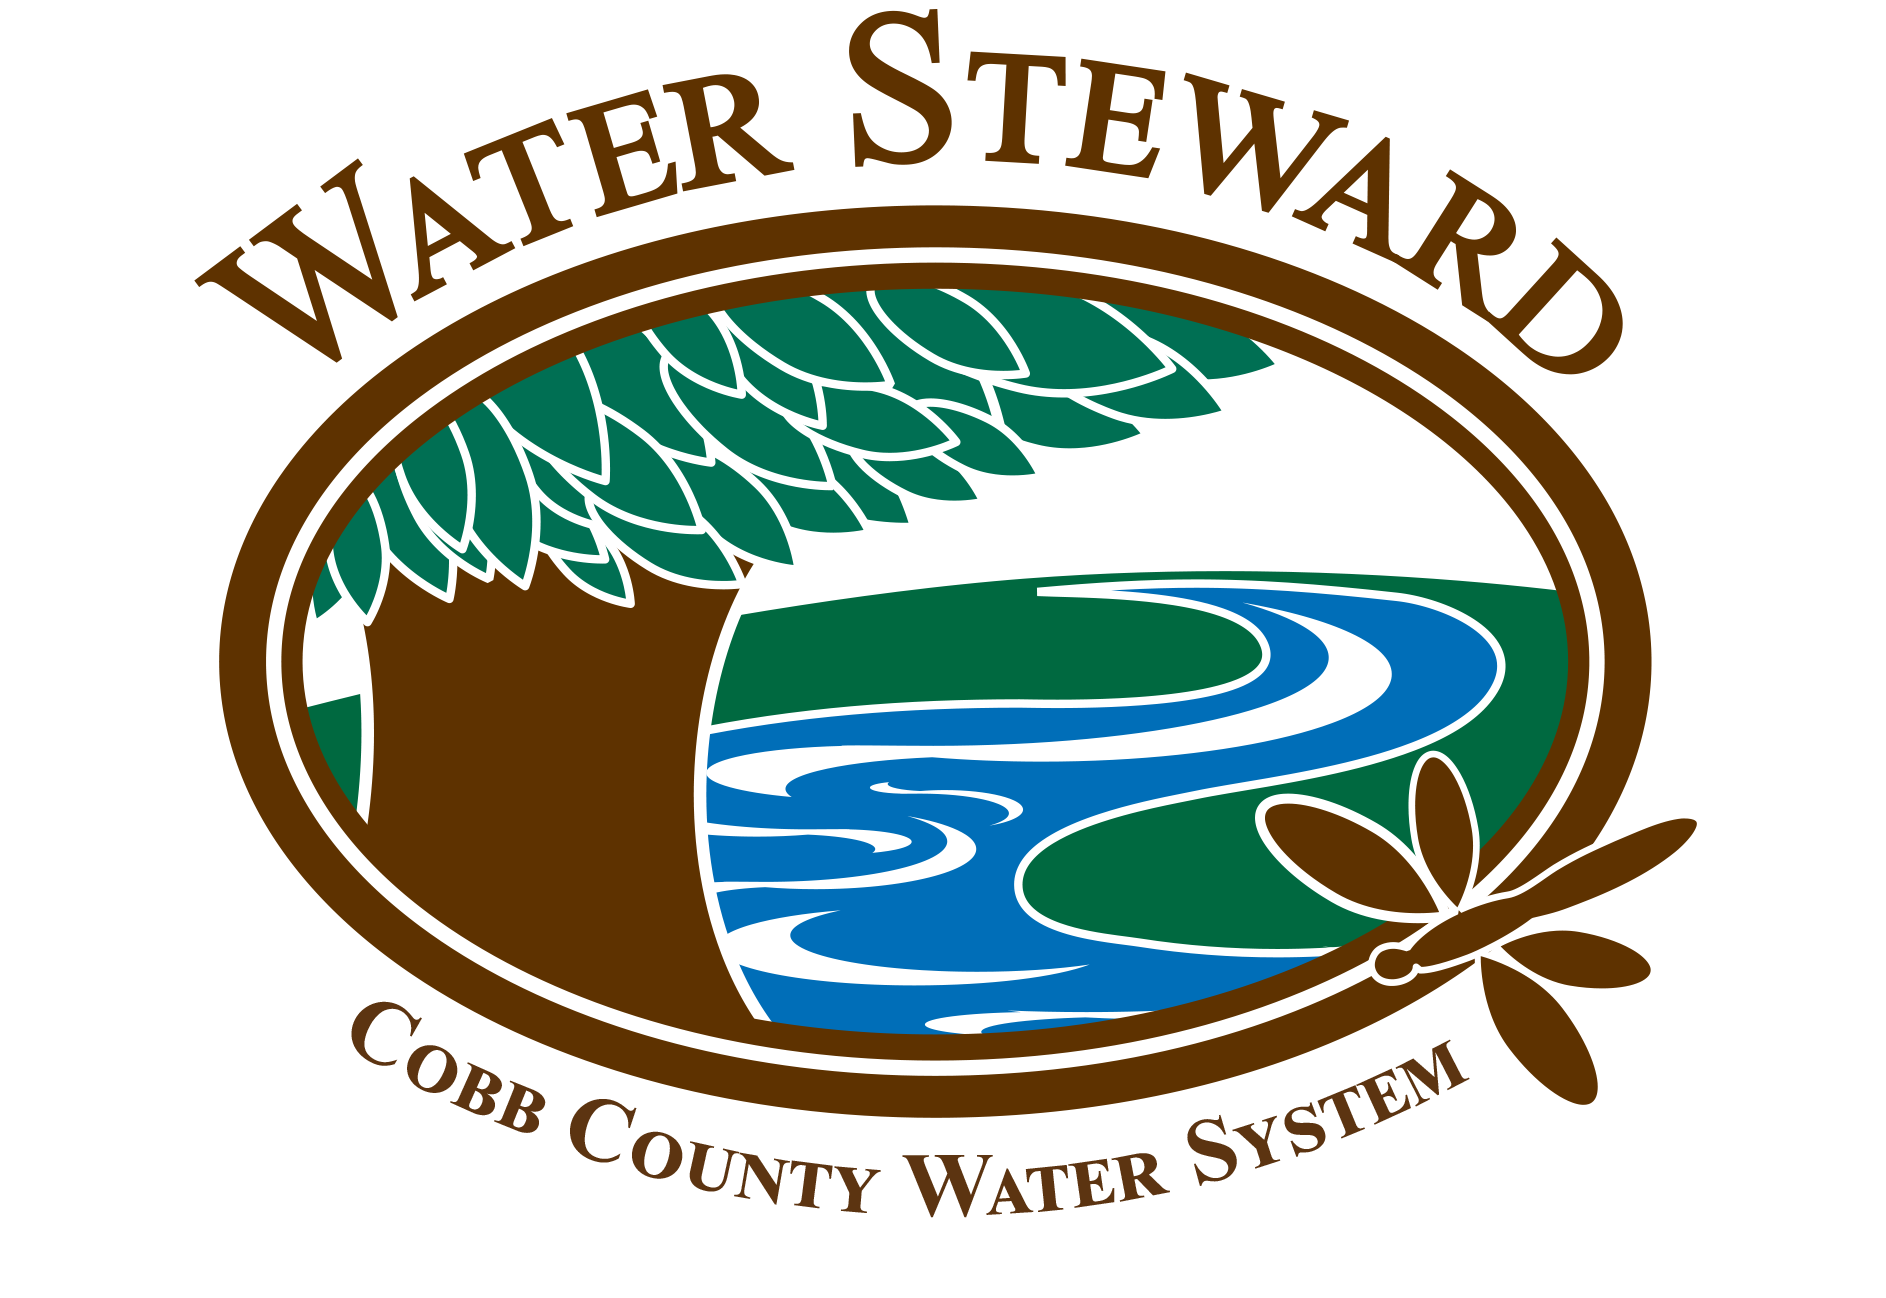 Cobb County Water System
